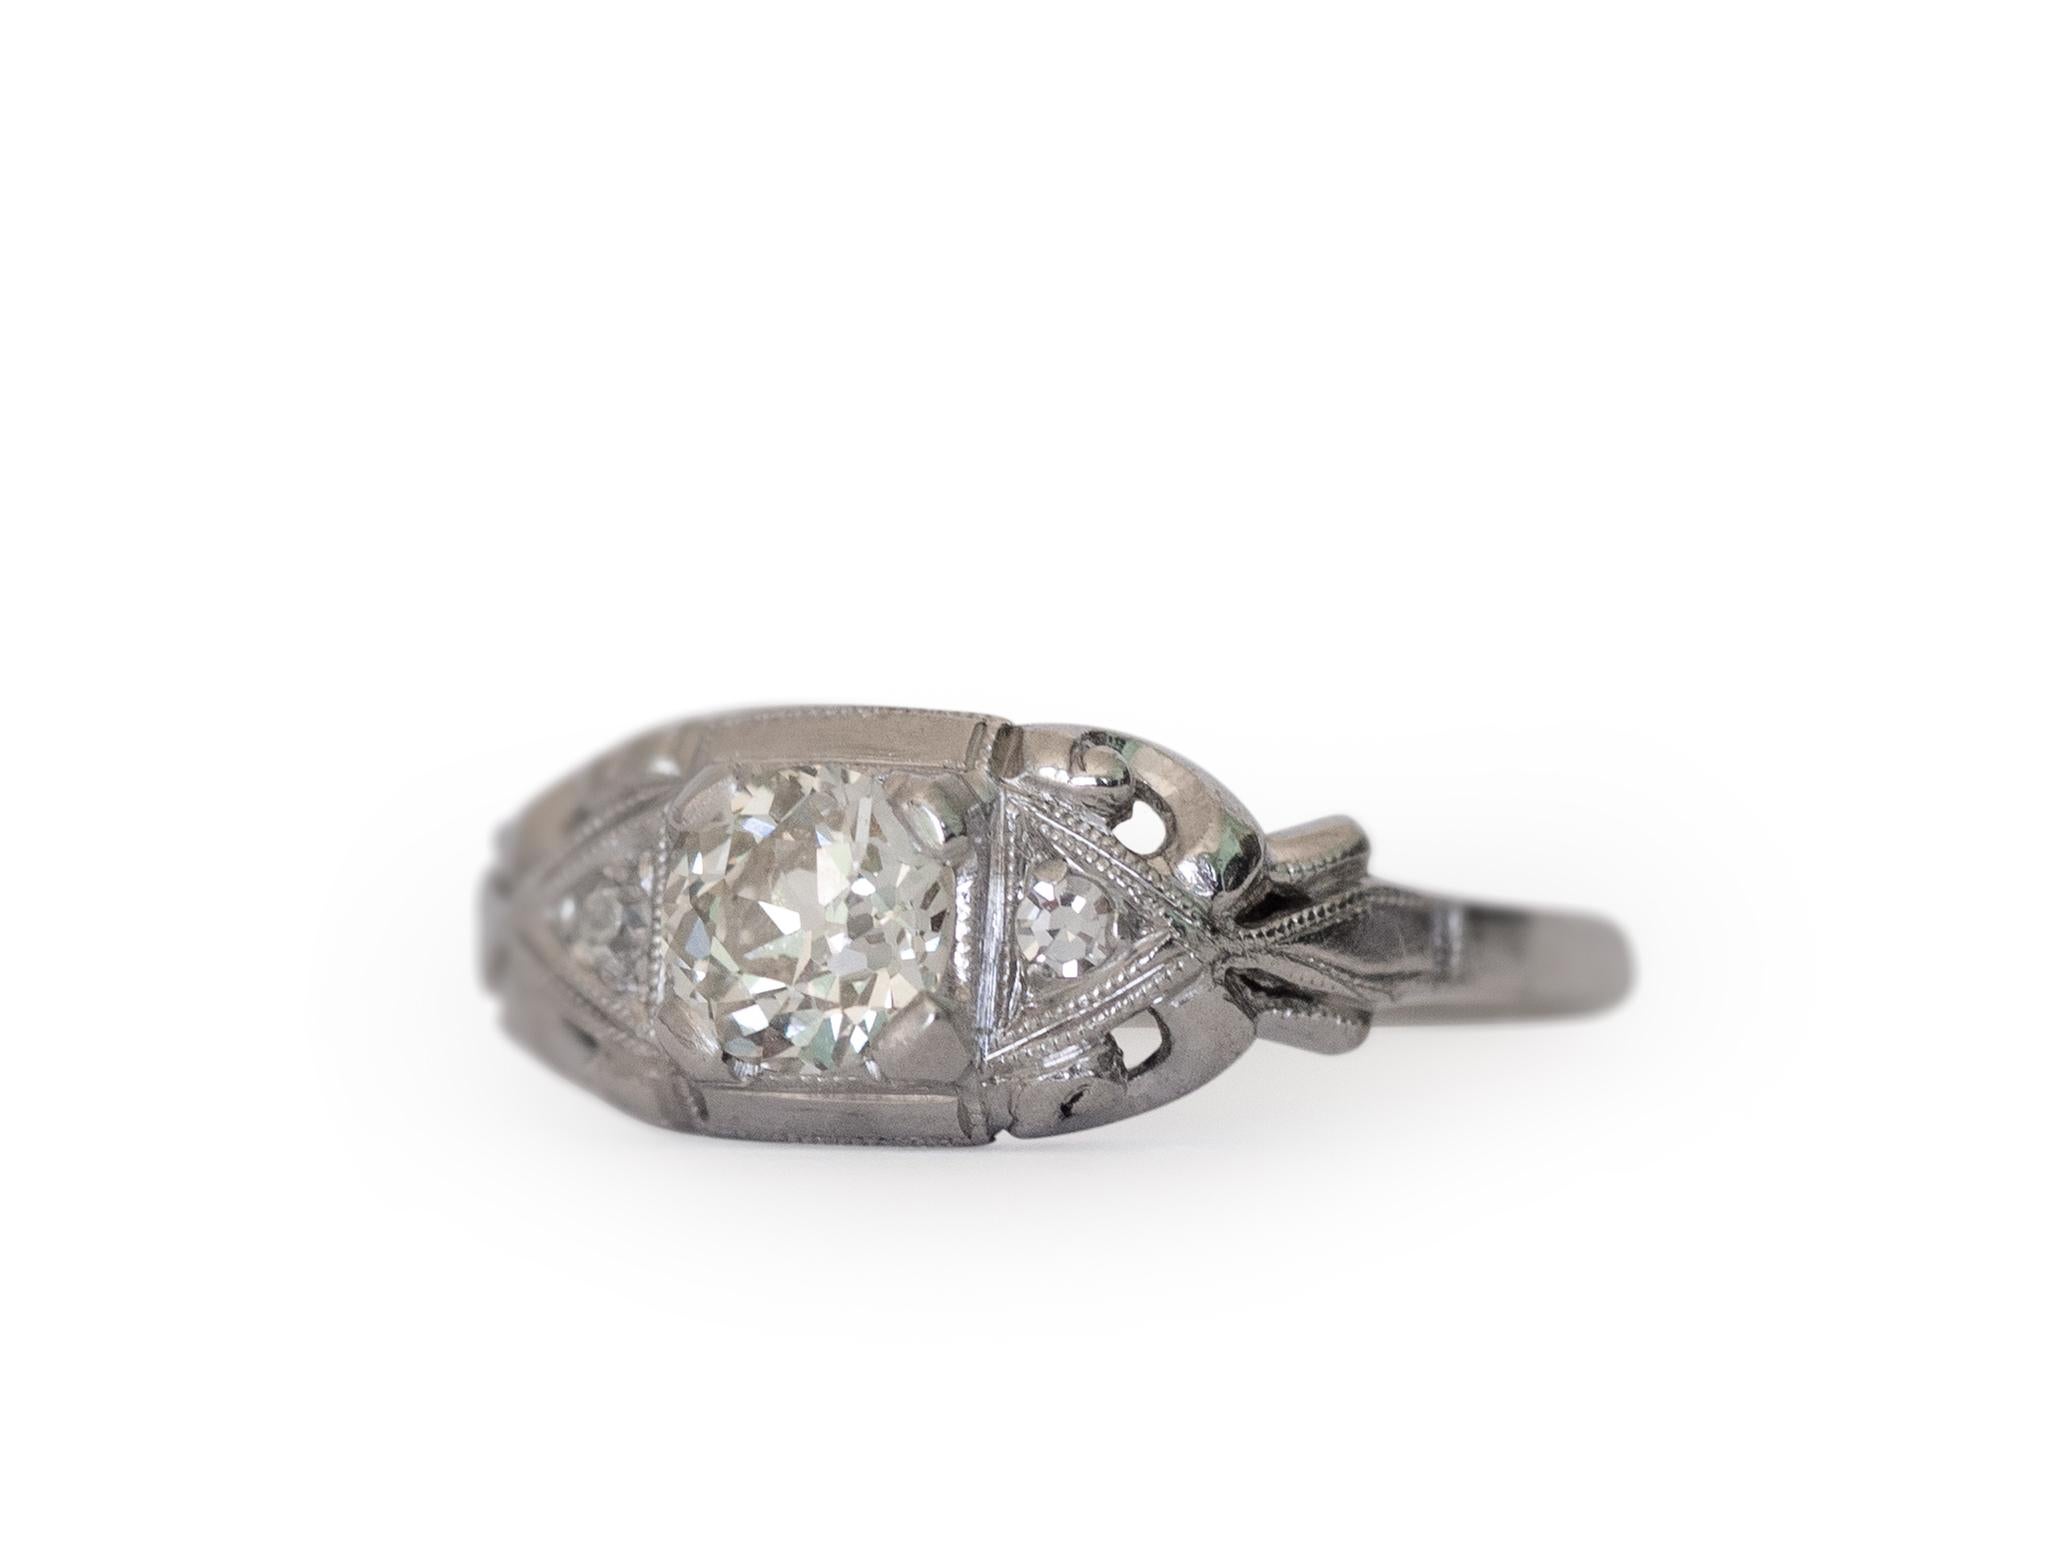 Ring Size: 5
Metal Type: Platinum  [Hallmarked, and Tested]
Weight: 3  grams

Center Diamond Details:
GIA REPORT #: 5202 986700
Weight: .42 carat
Cut: Old European Brilliant
Color: L
Clarity: VS2

Side Diamond Details:
Weight: .04 carat
Cut: Antique